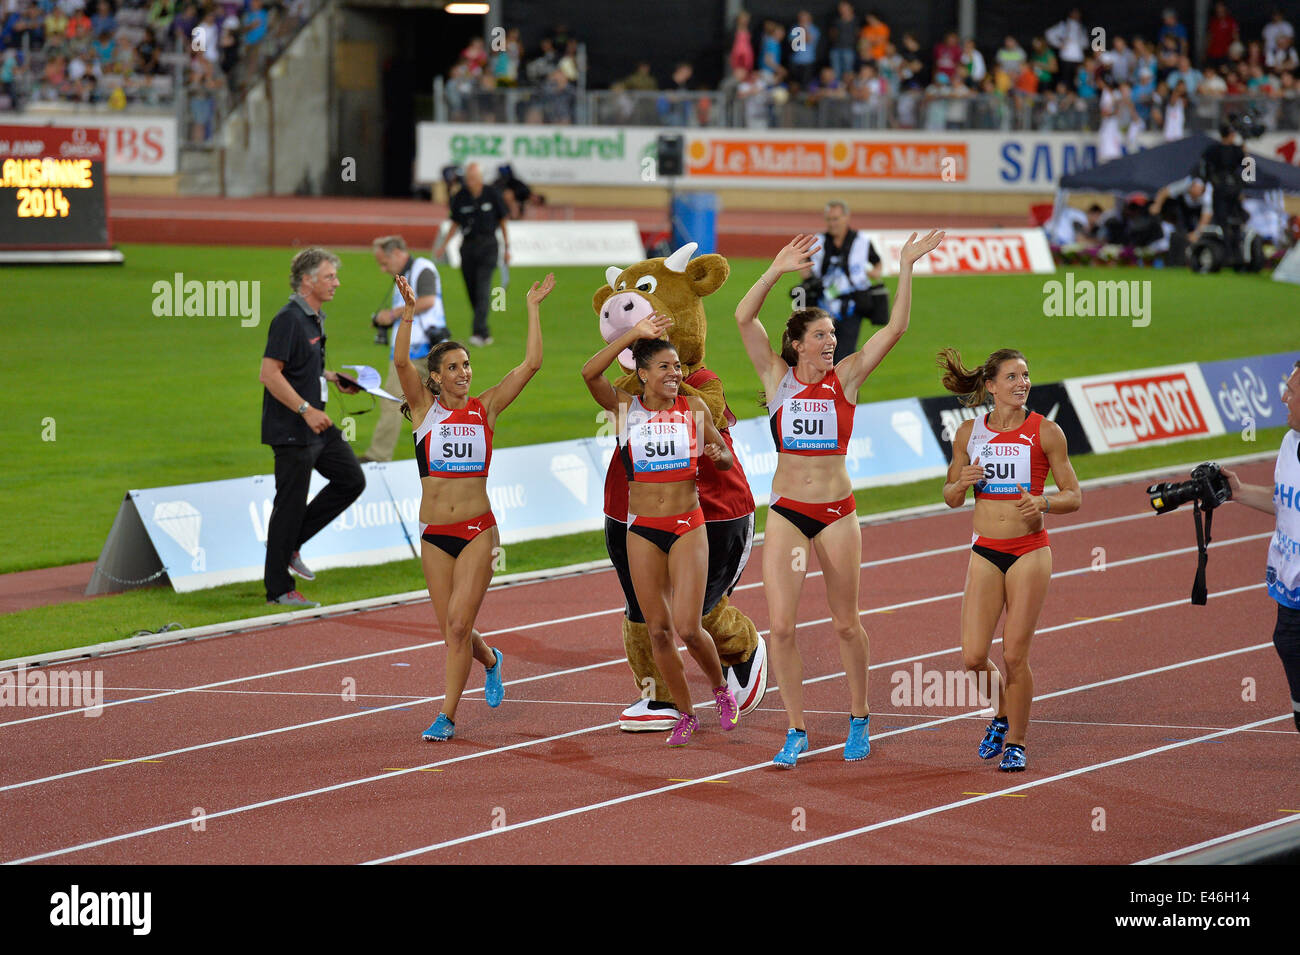 Lausanne Switzerland. 3rd July, 2014. Members of the Swiss (SUI) women's 4x100m relay team celebrate after setting a National record at Diamond League Lausanne - Athletissima 2014.  Credit:  Ted Byrne/Alamy Live News Stock Photo